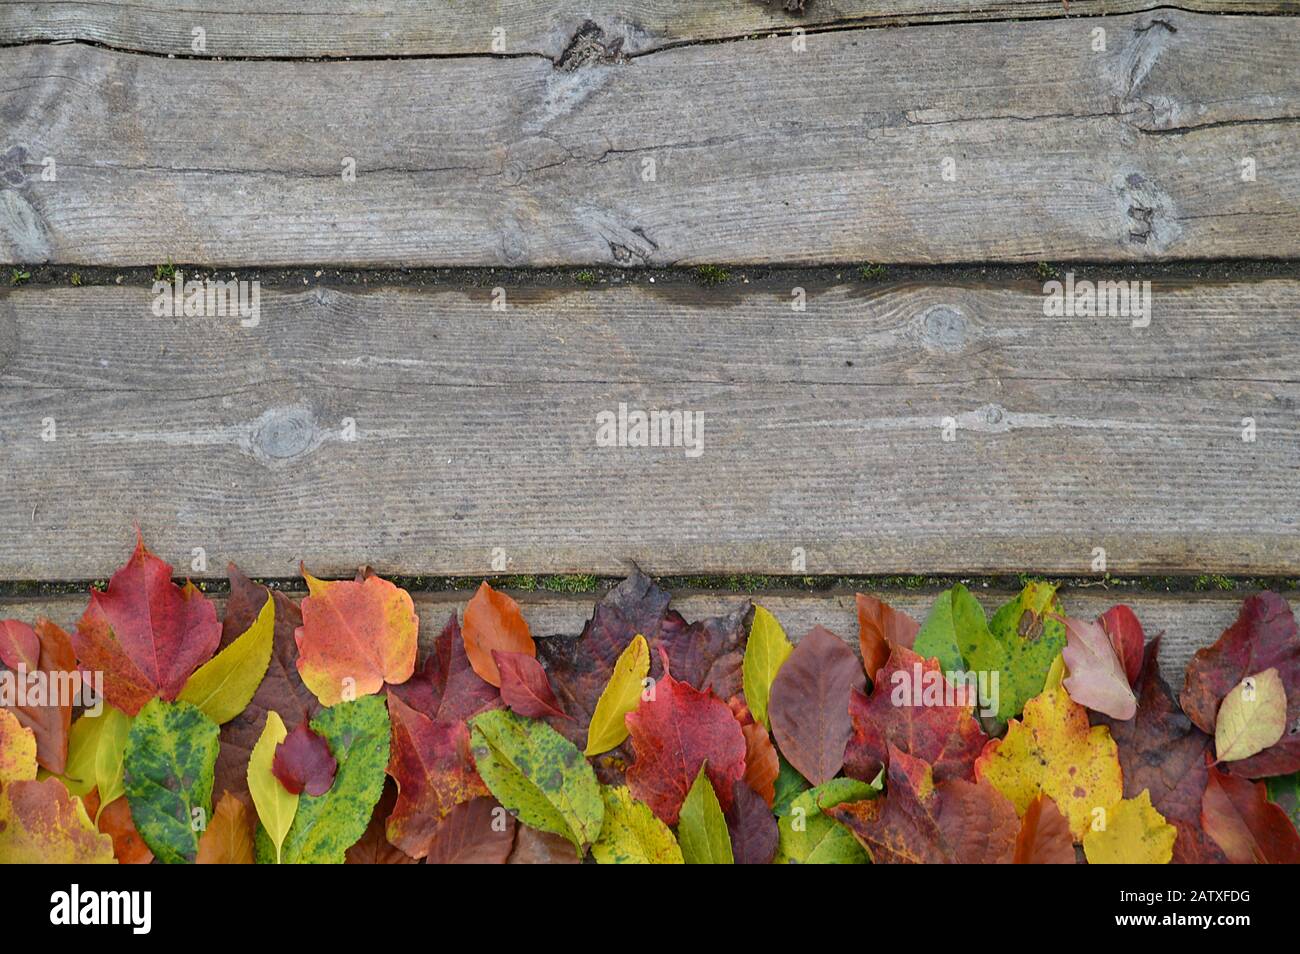 border of colorful fall leaves on an old wood deck Stock Photo